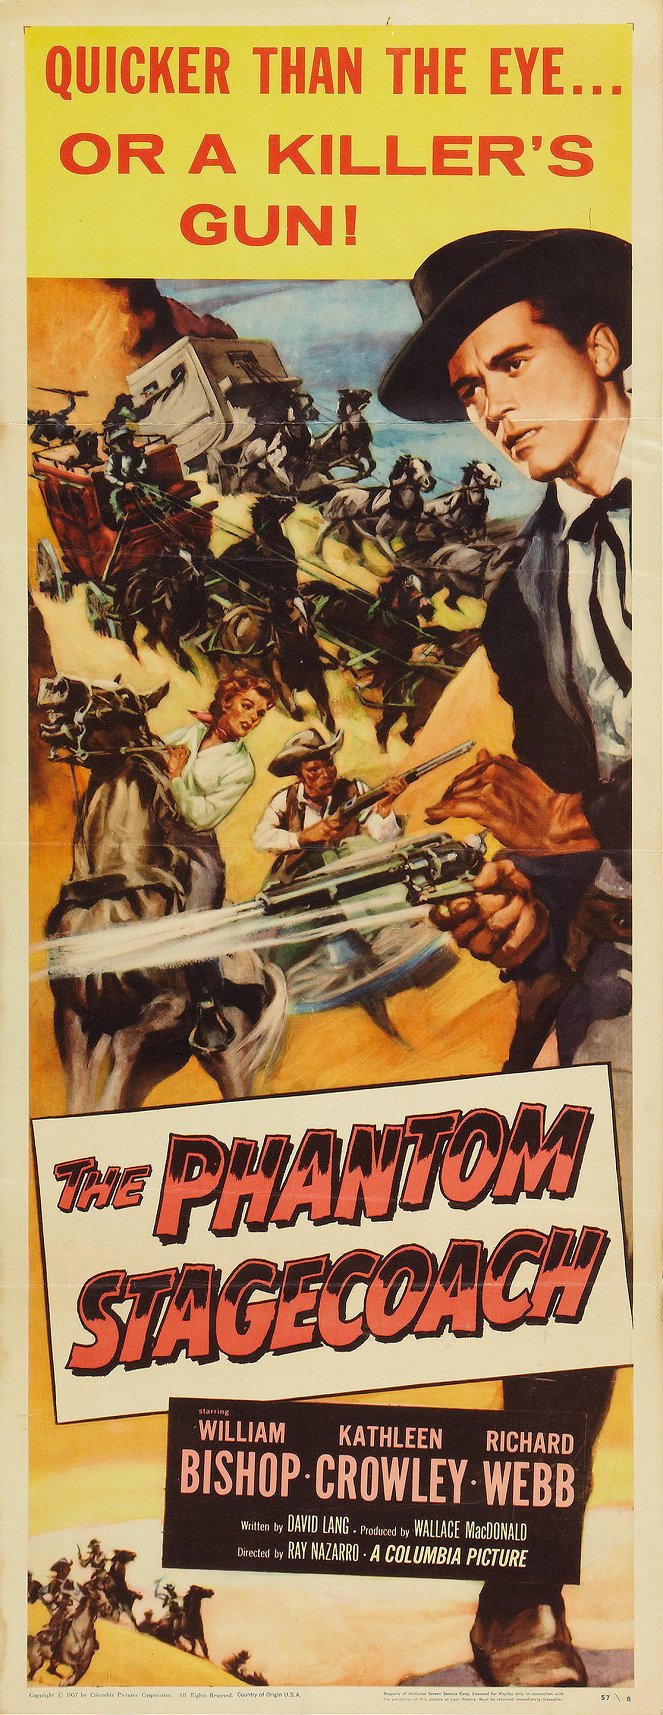 The Phantom Stagecoach - Posters